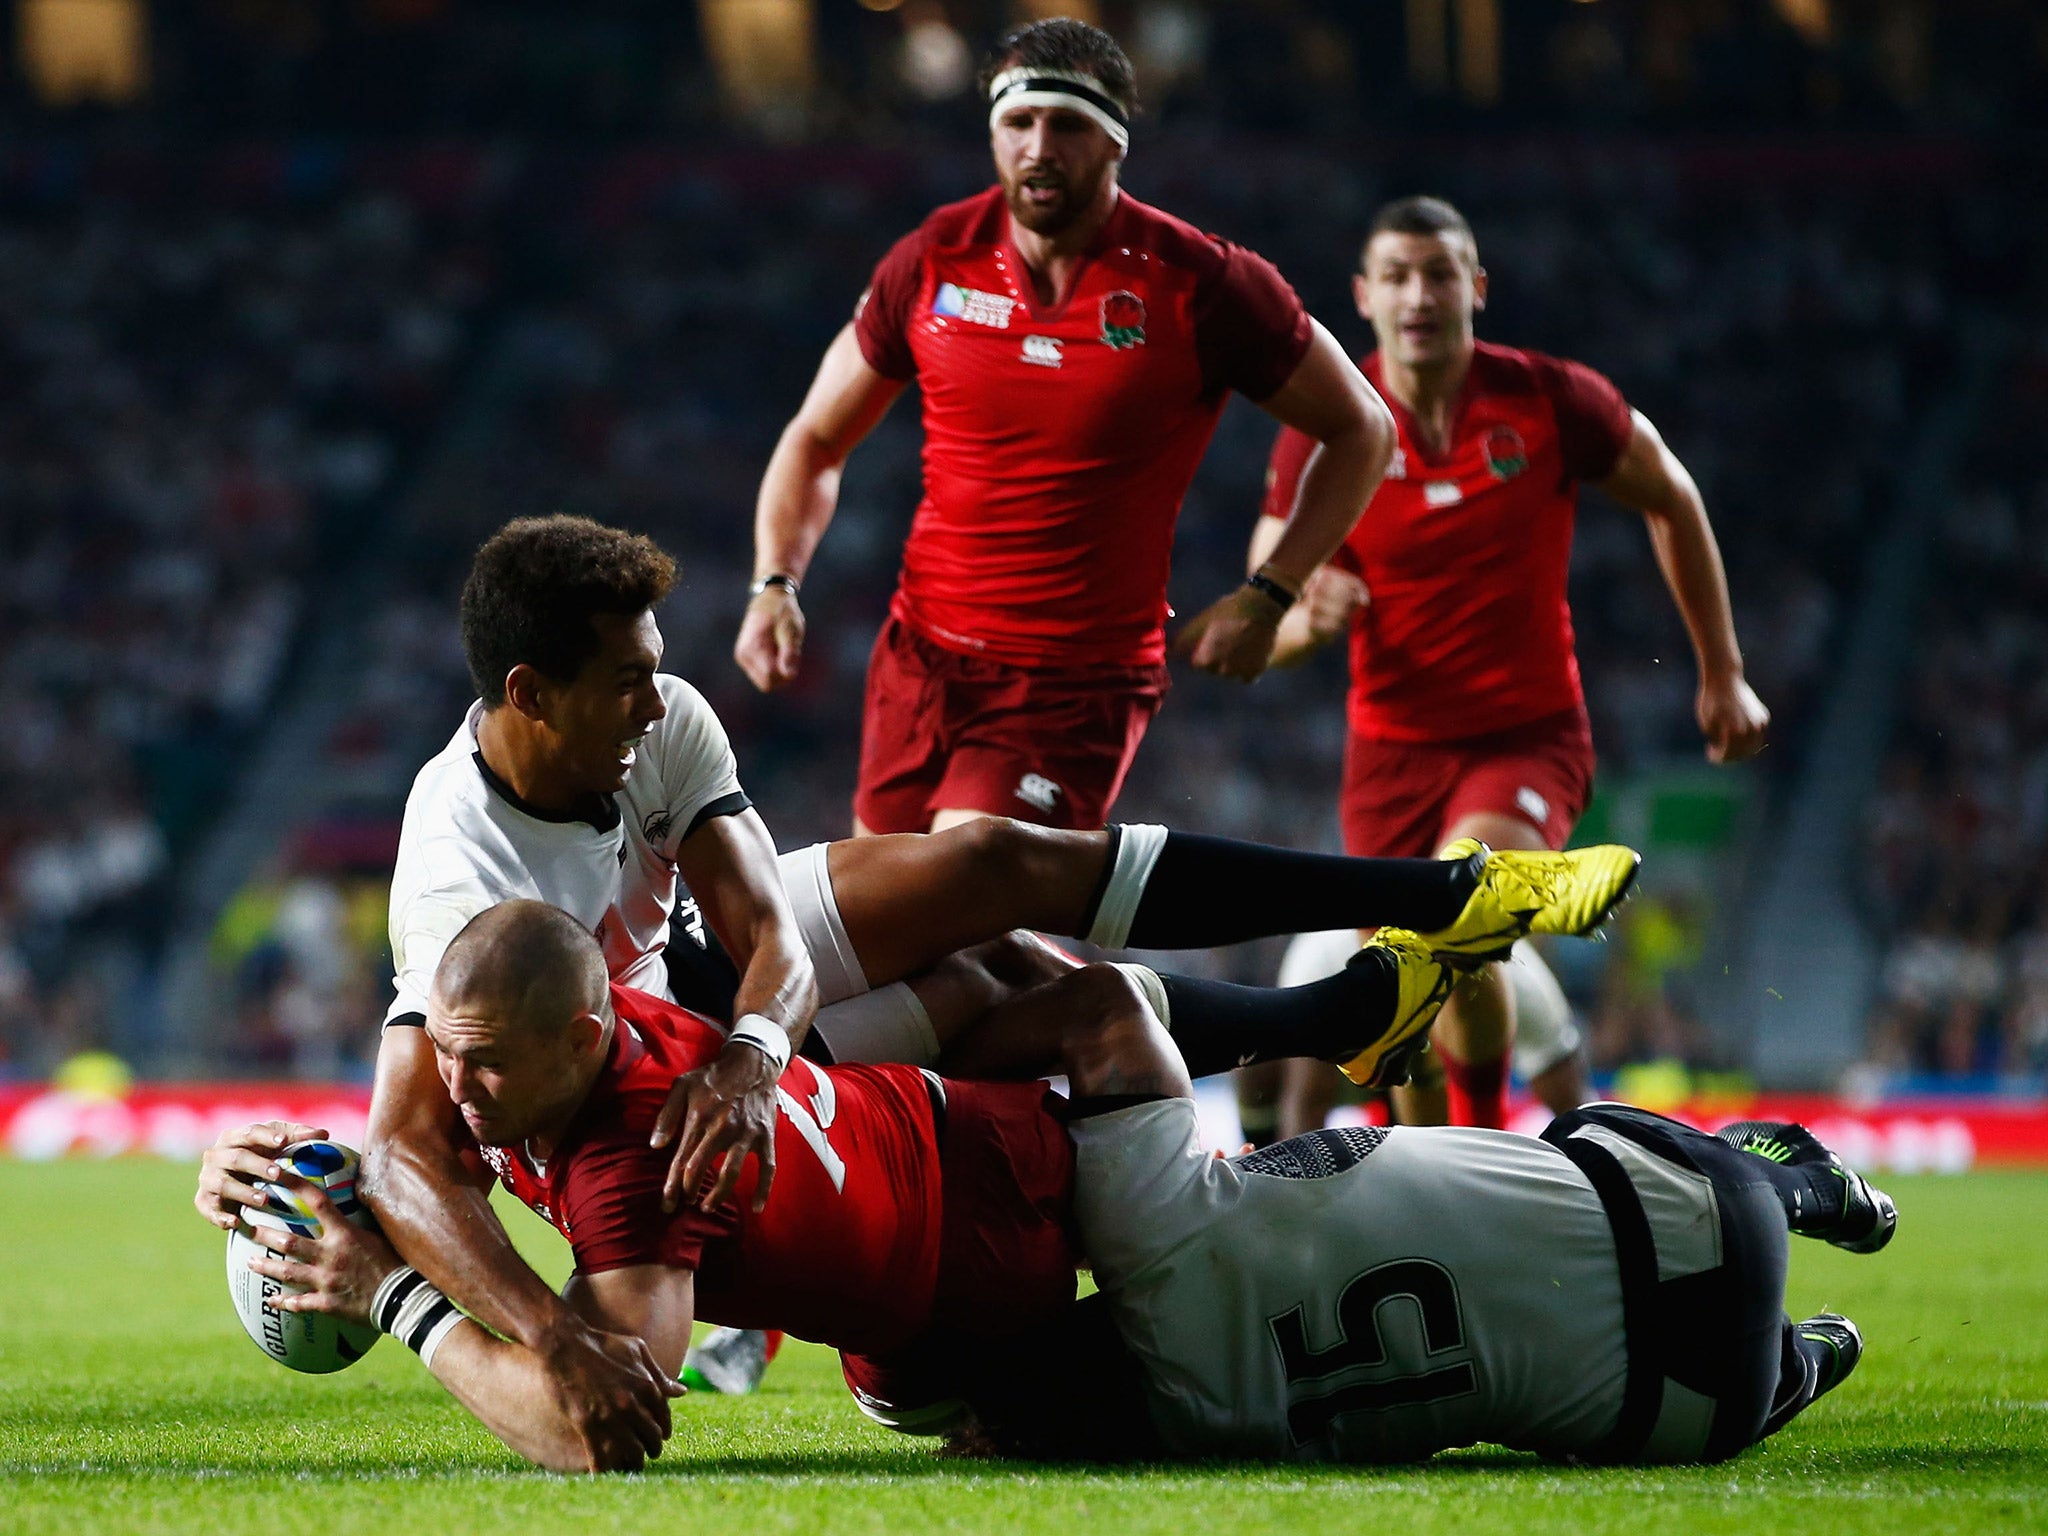 Mike Brown scores for England in the win over Fiji